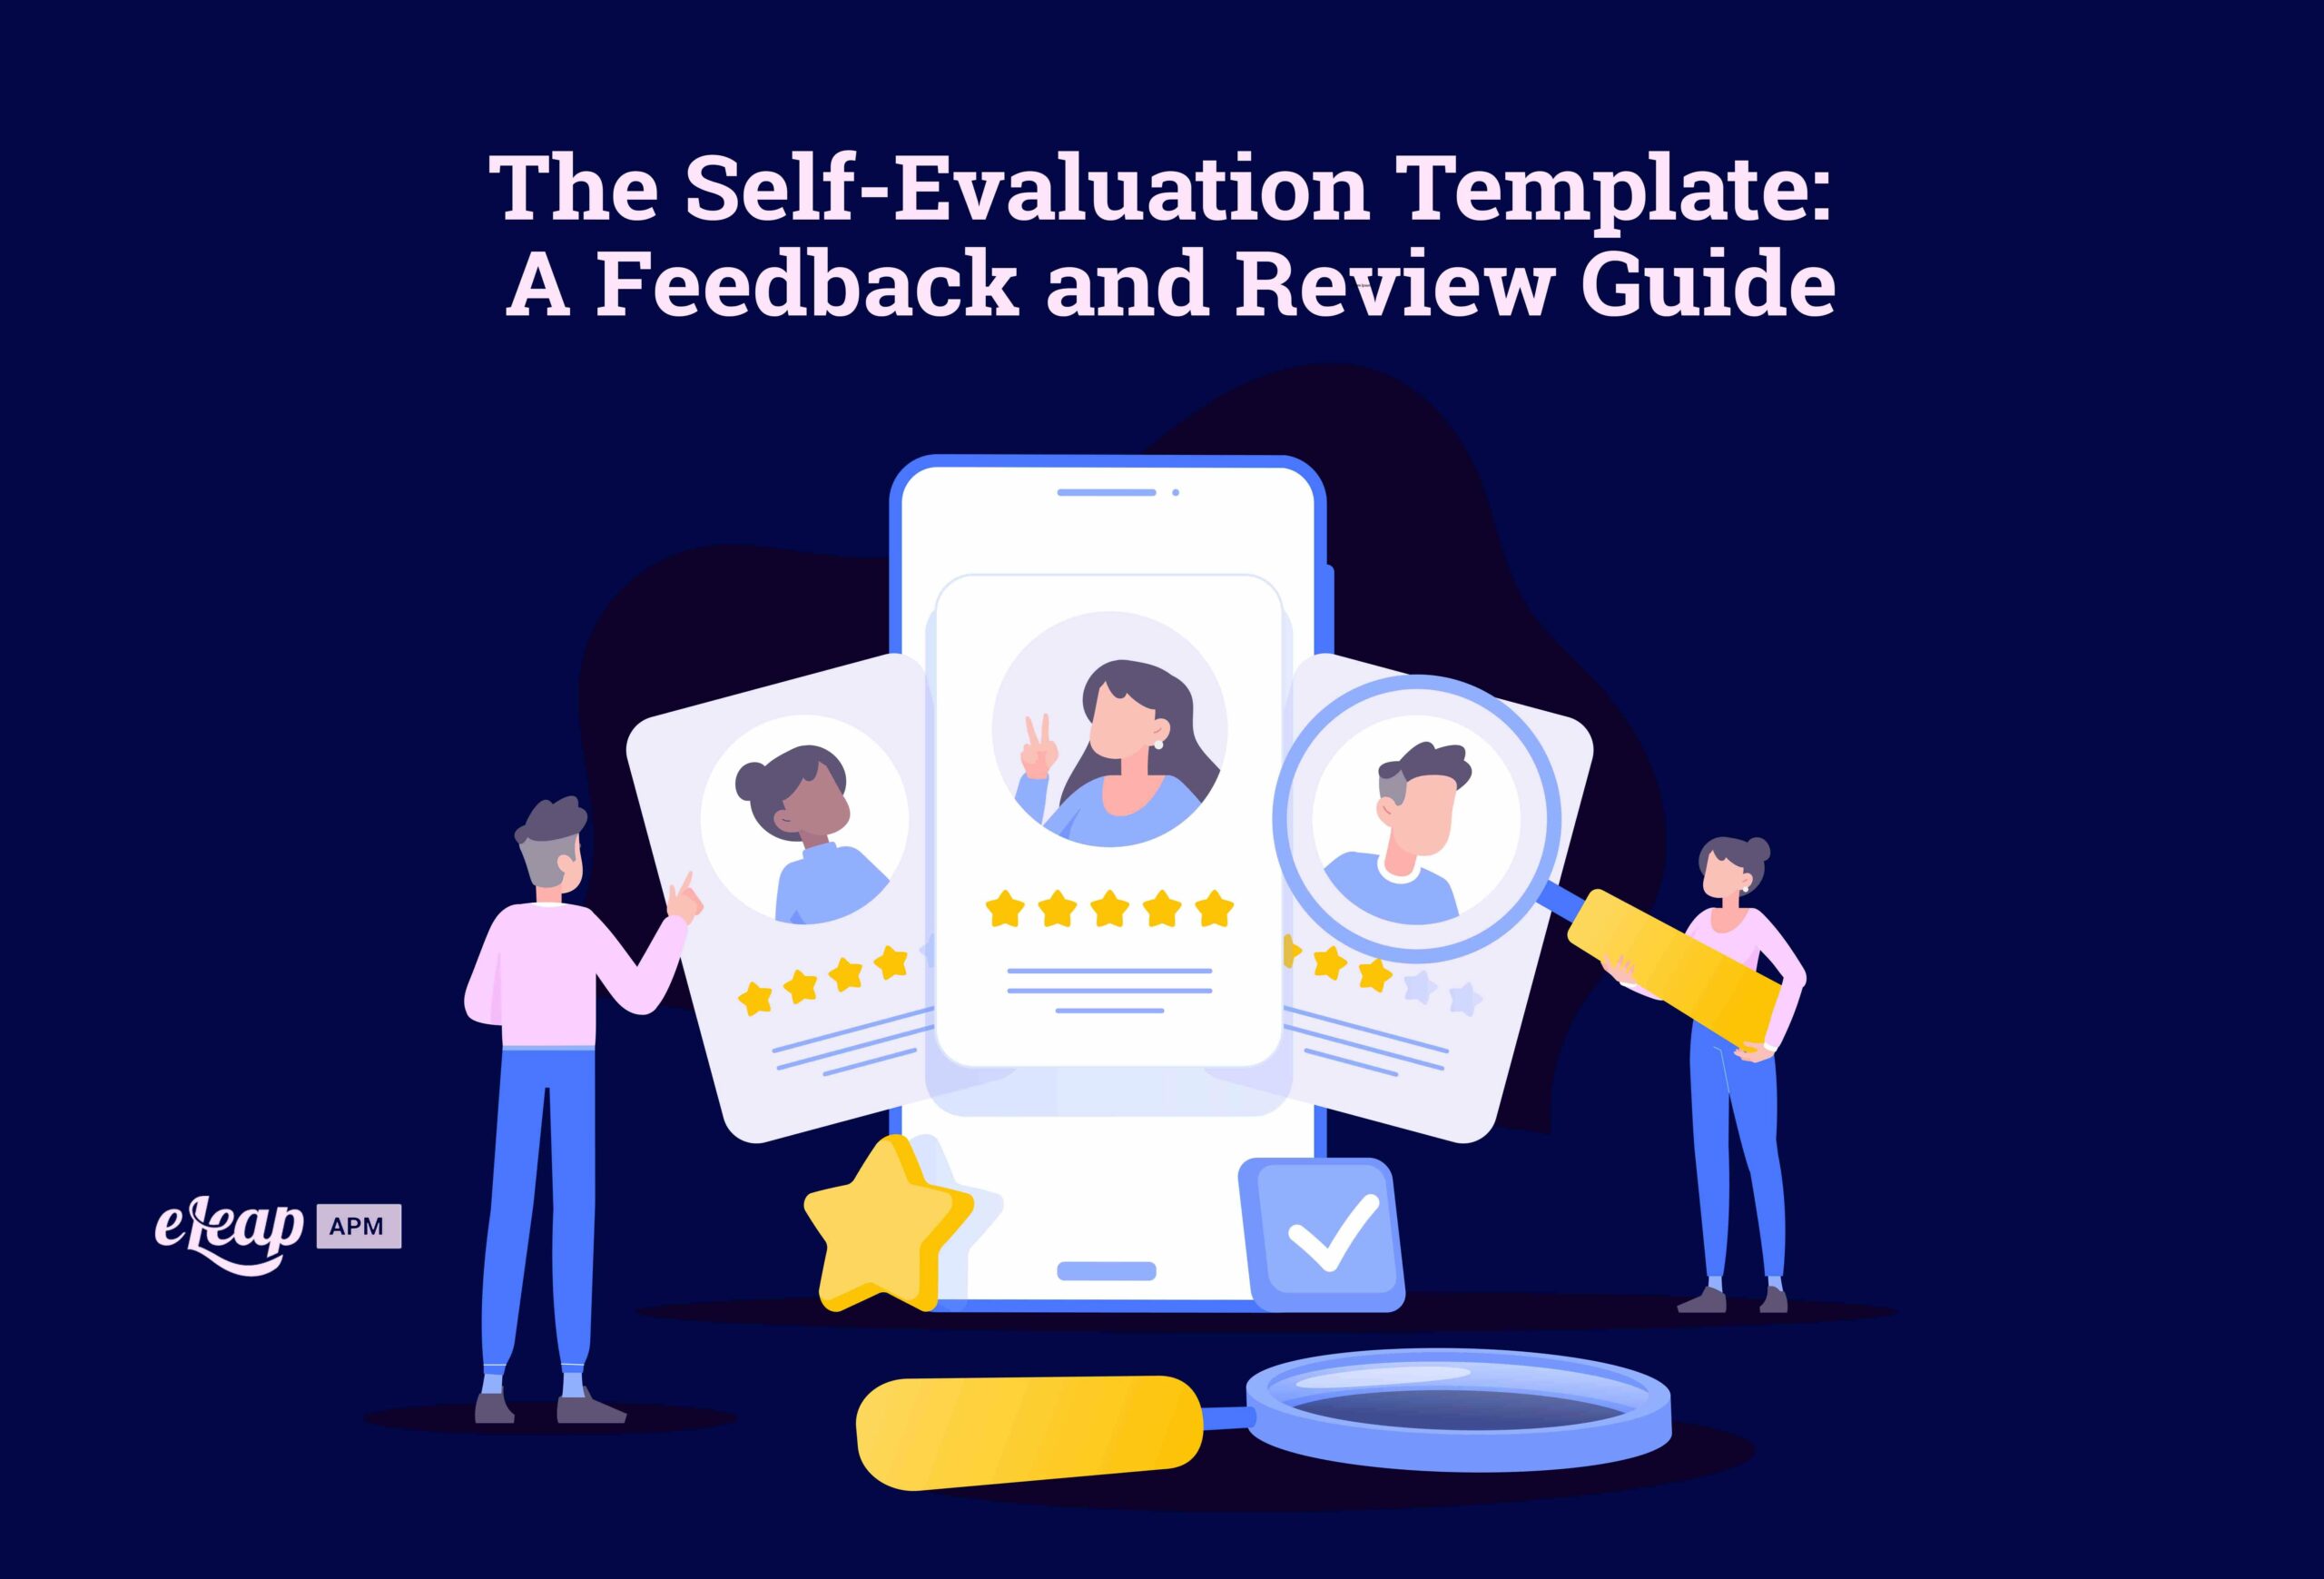 The Self-Evaluation Template: A Feedback and Review Guide